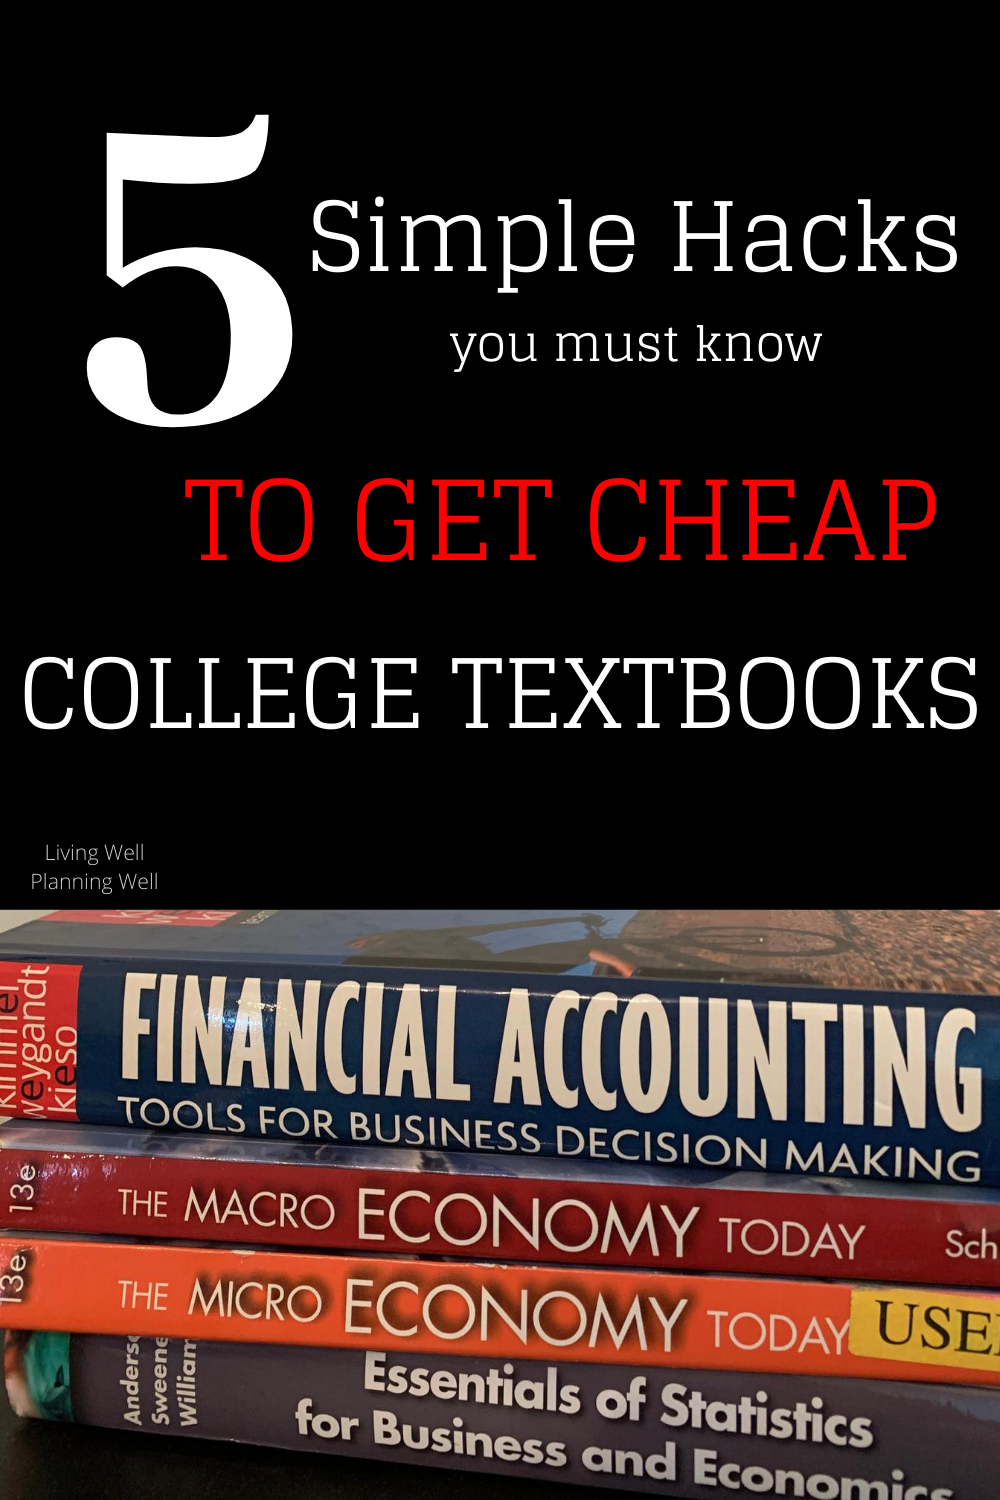 How To Get College Textbooks For Cheap in 2020